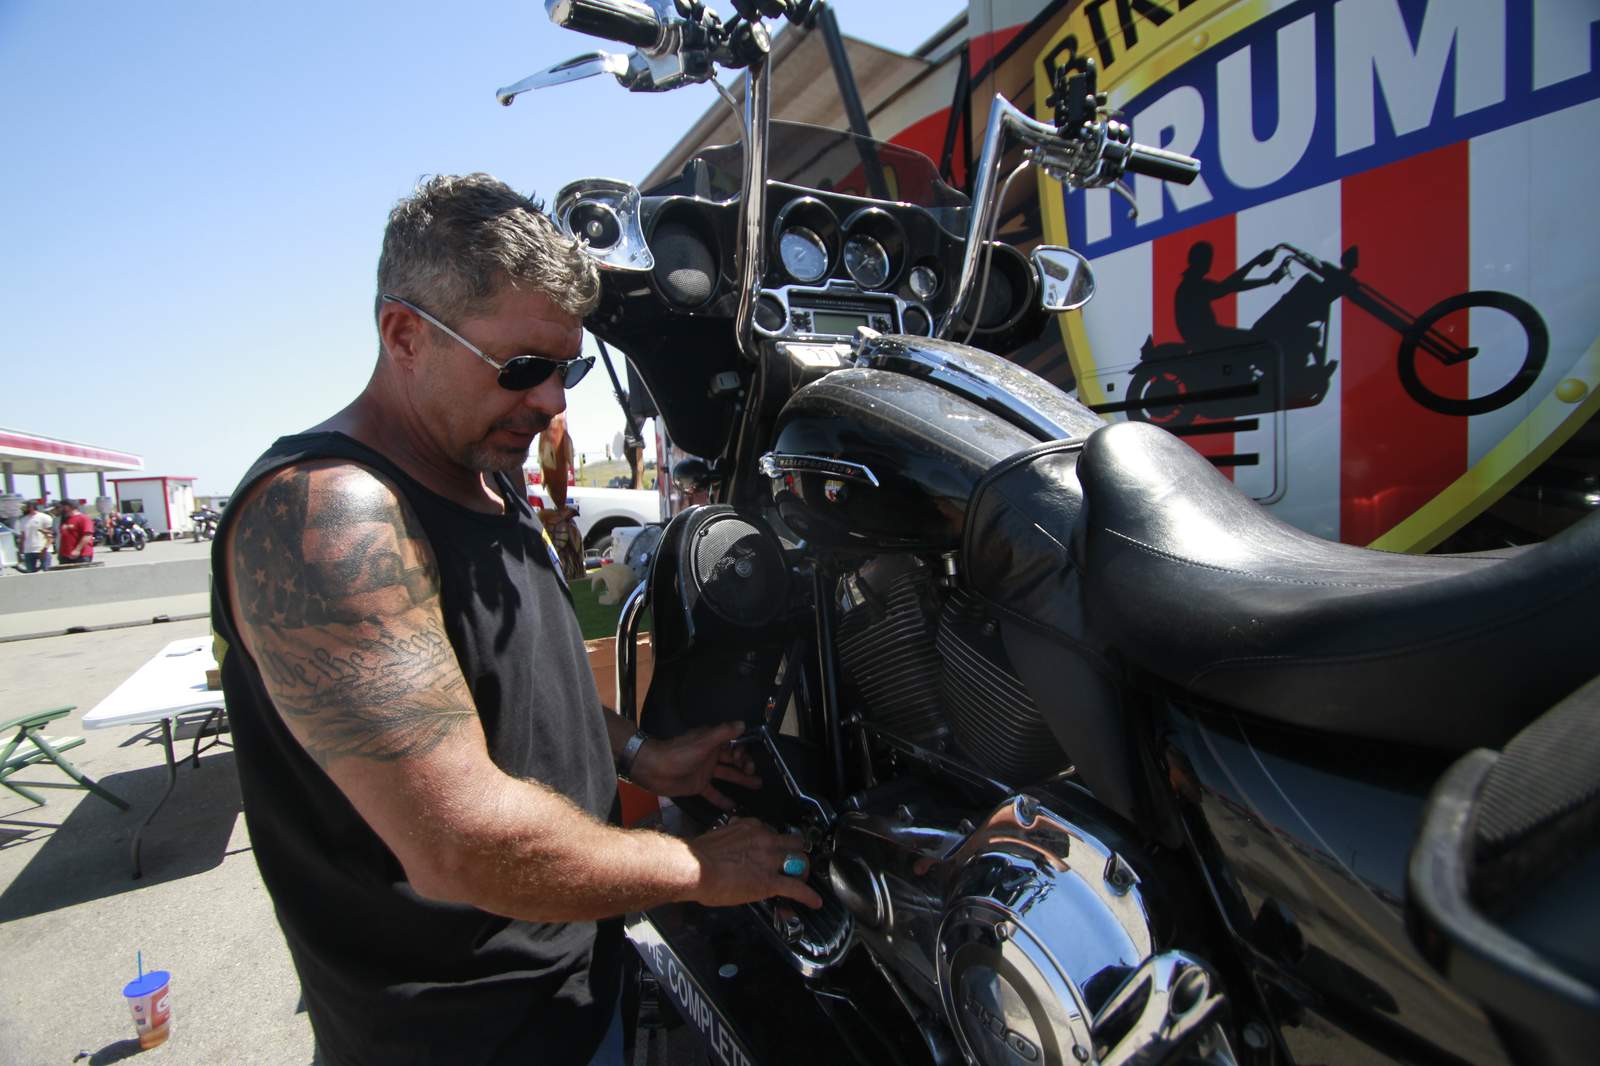 At Sturgis, Trump supporters look to turn bikers into voters